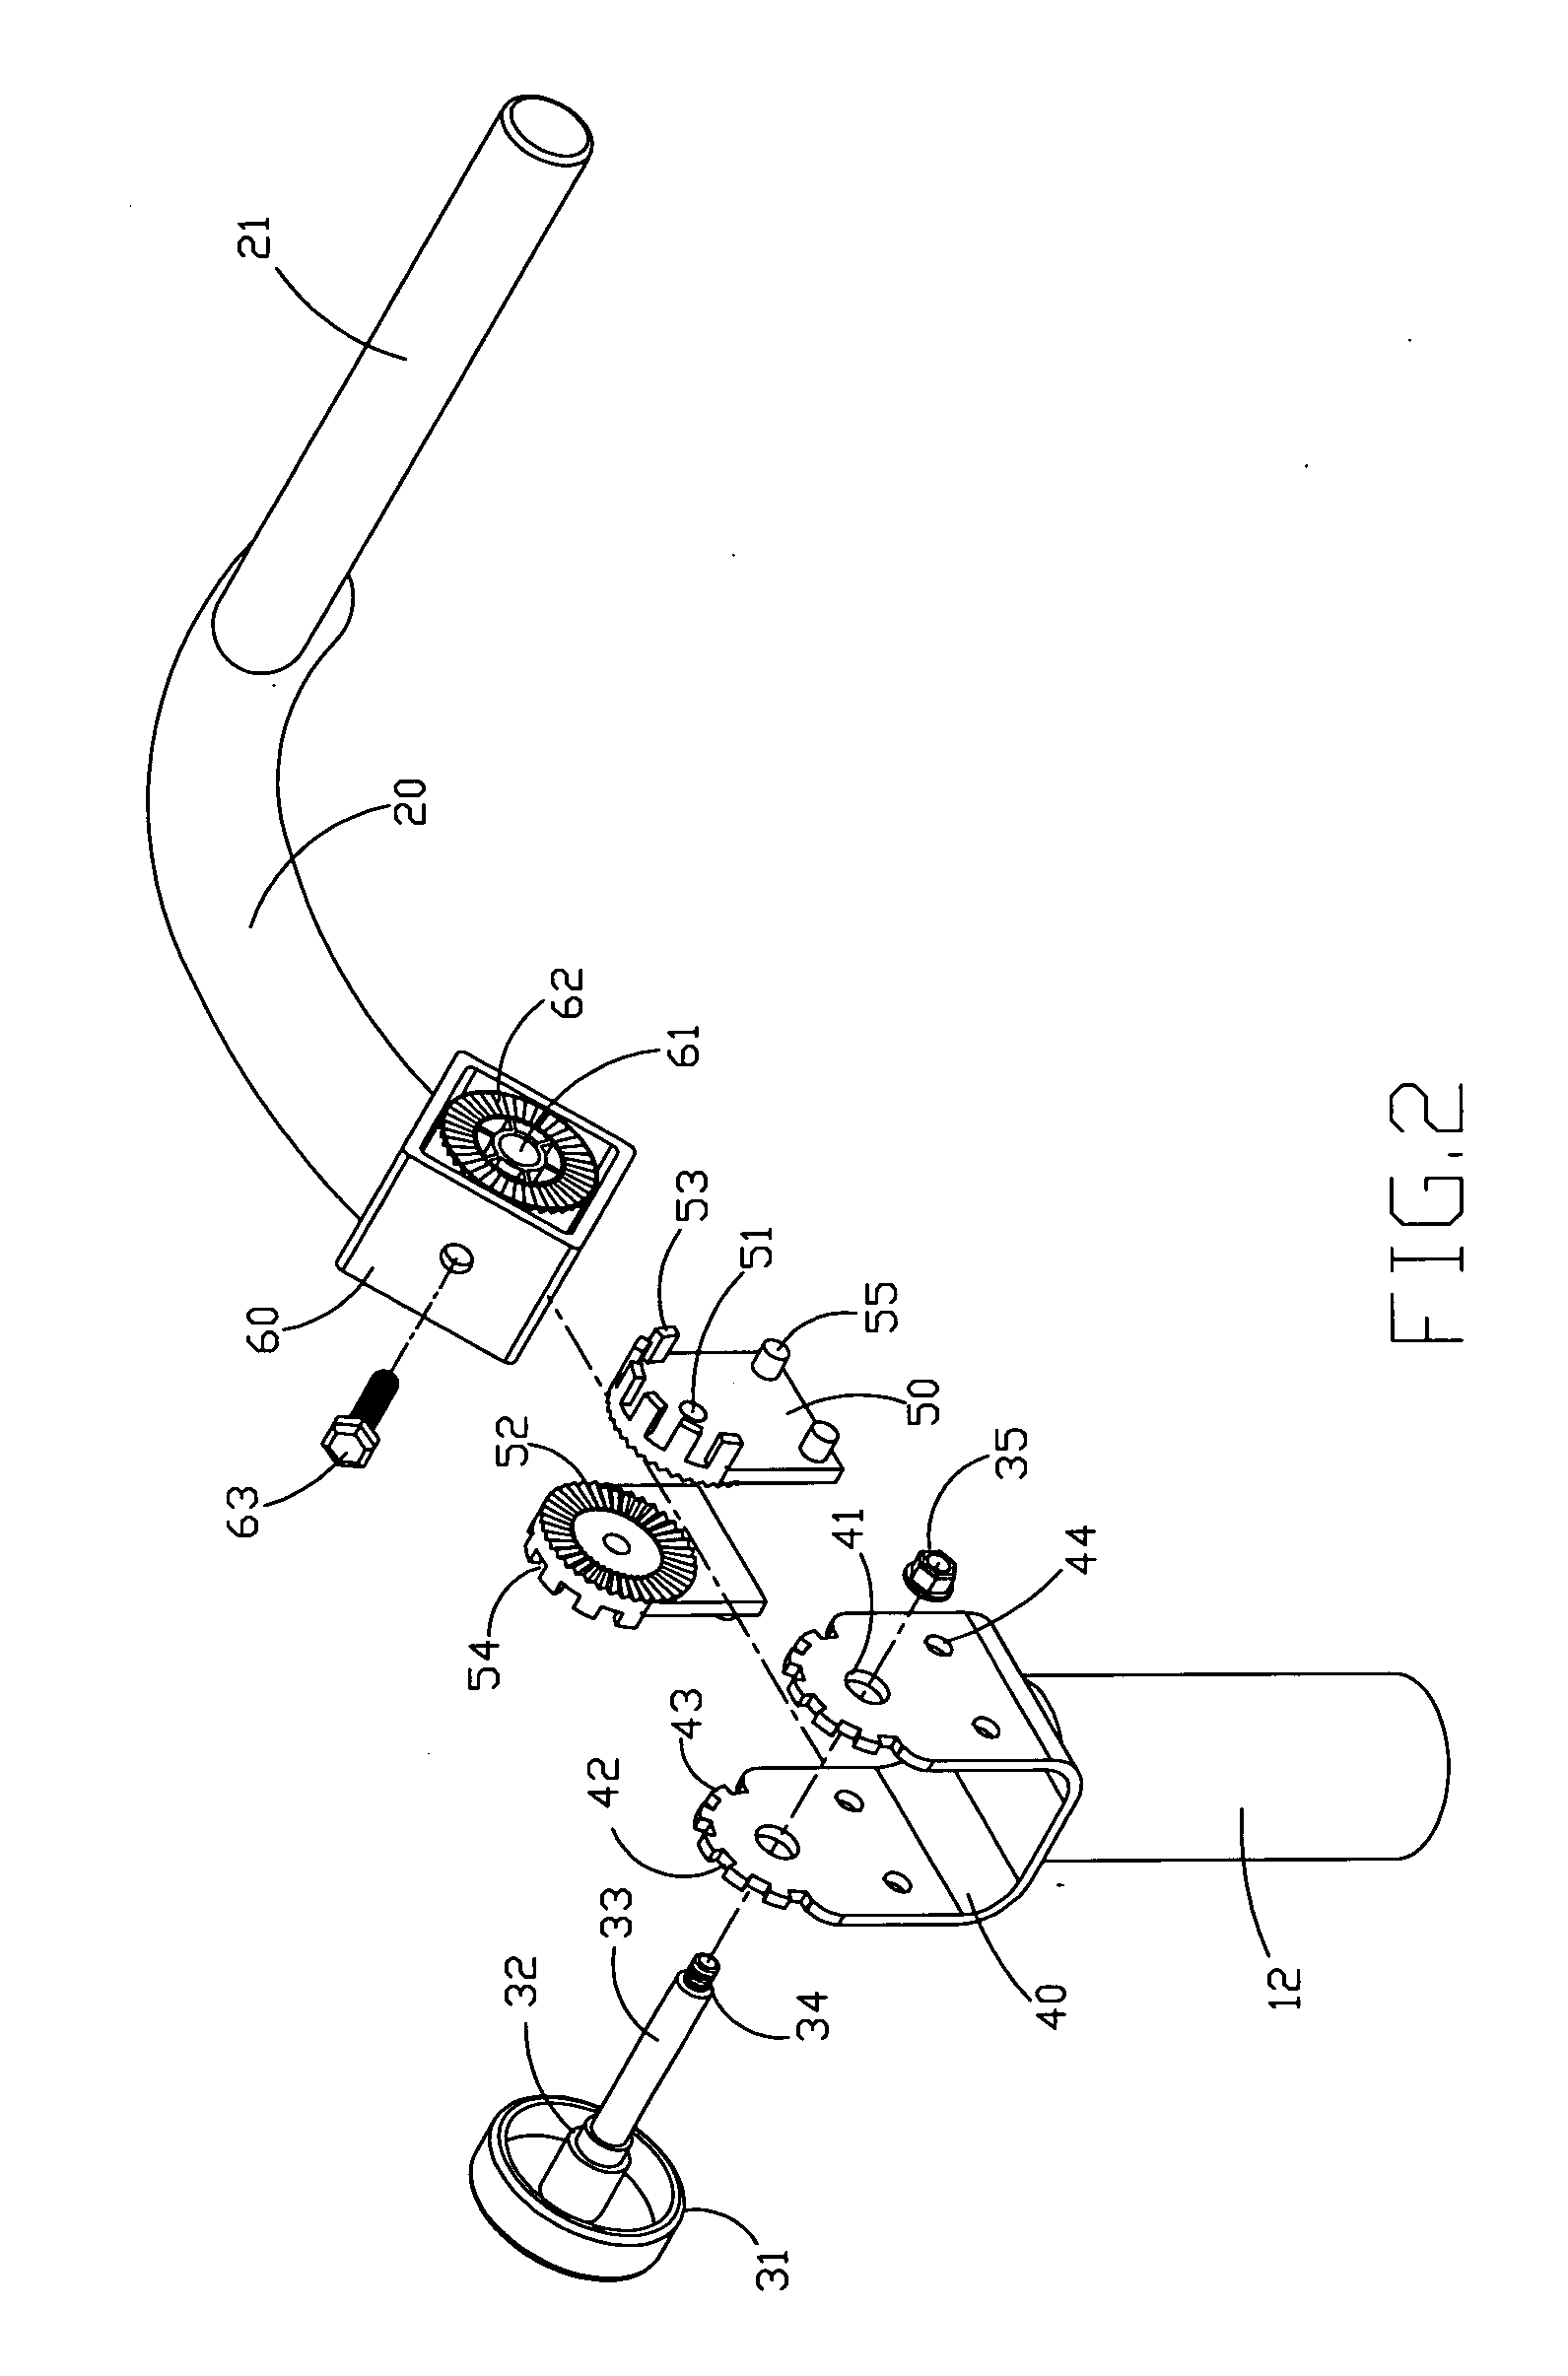 Adjustable handle support of an exercise apparatus